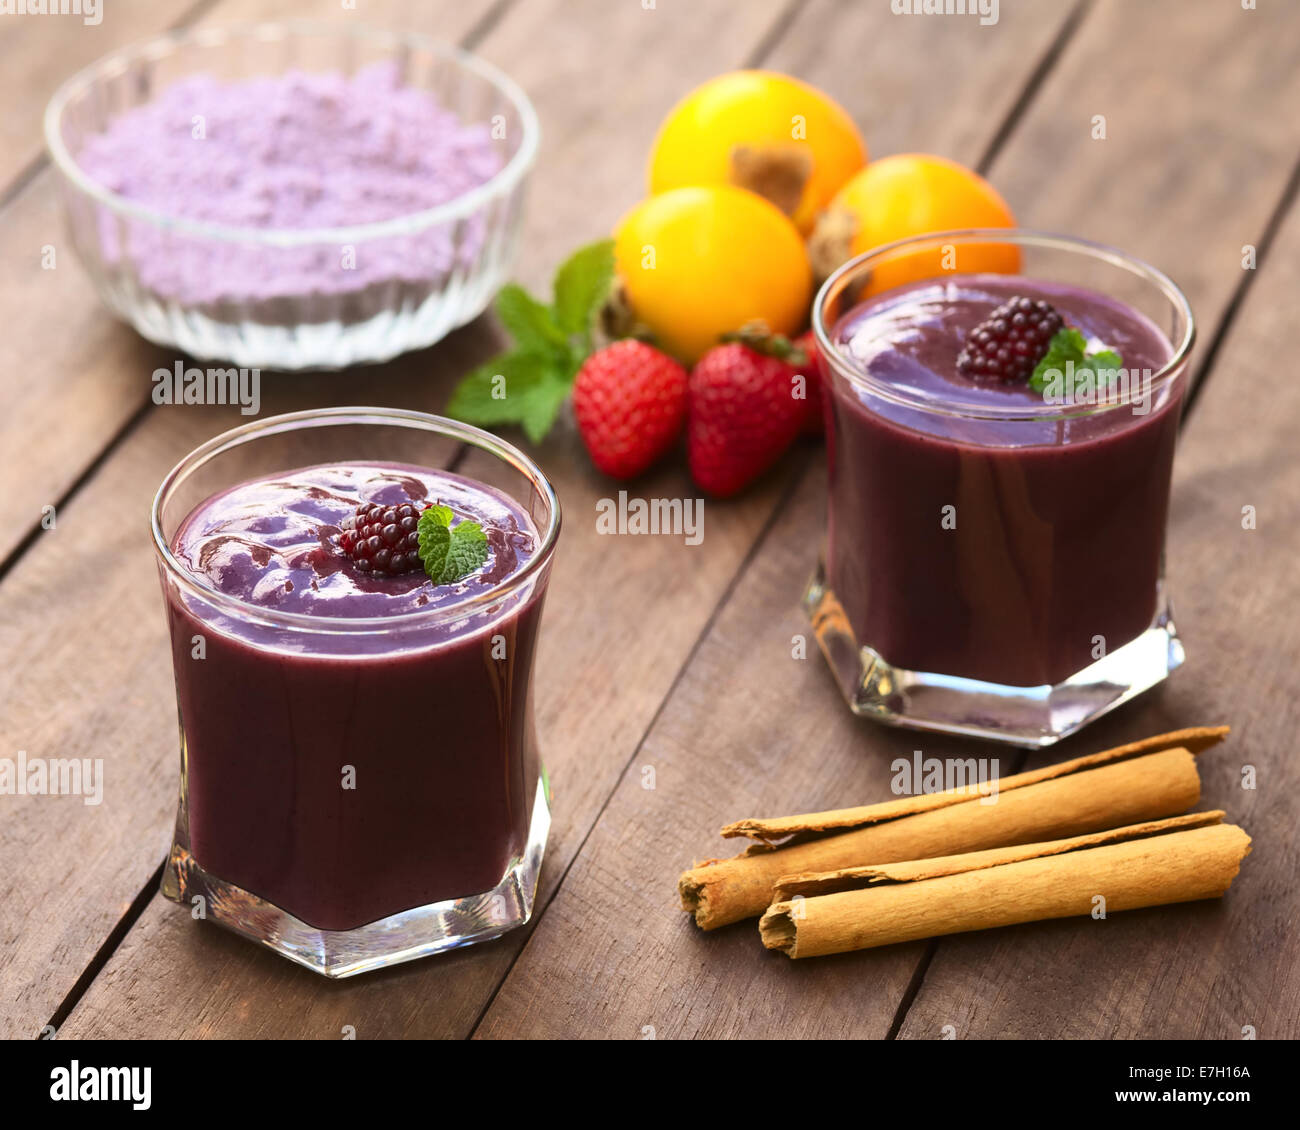 Ecuadorian traditional thick drink called Colada Morada, prepared by cooking purple corn flour and different fruits Stock Photo